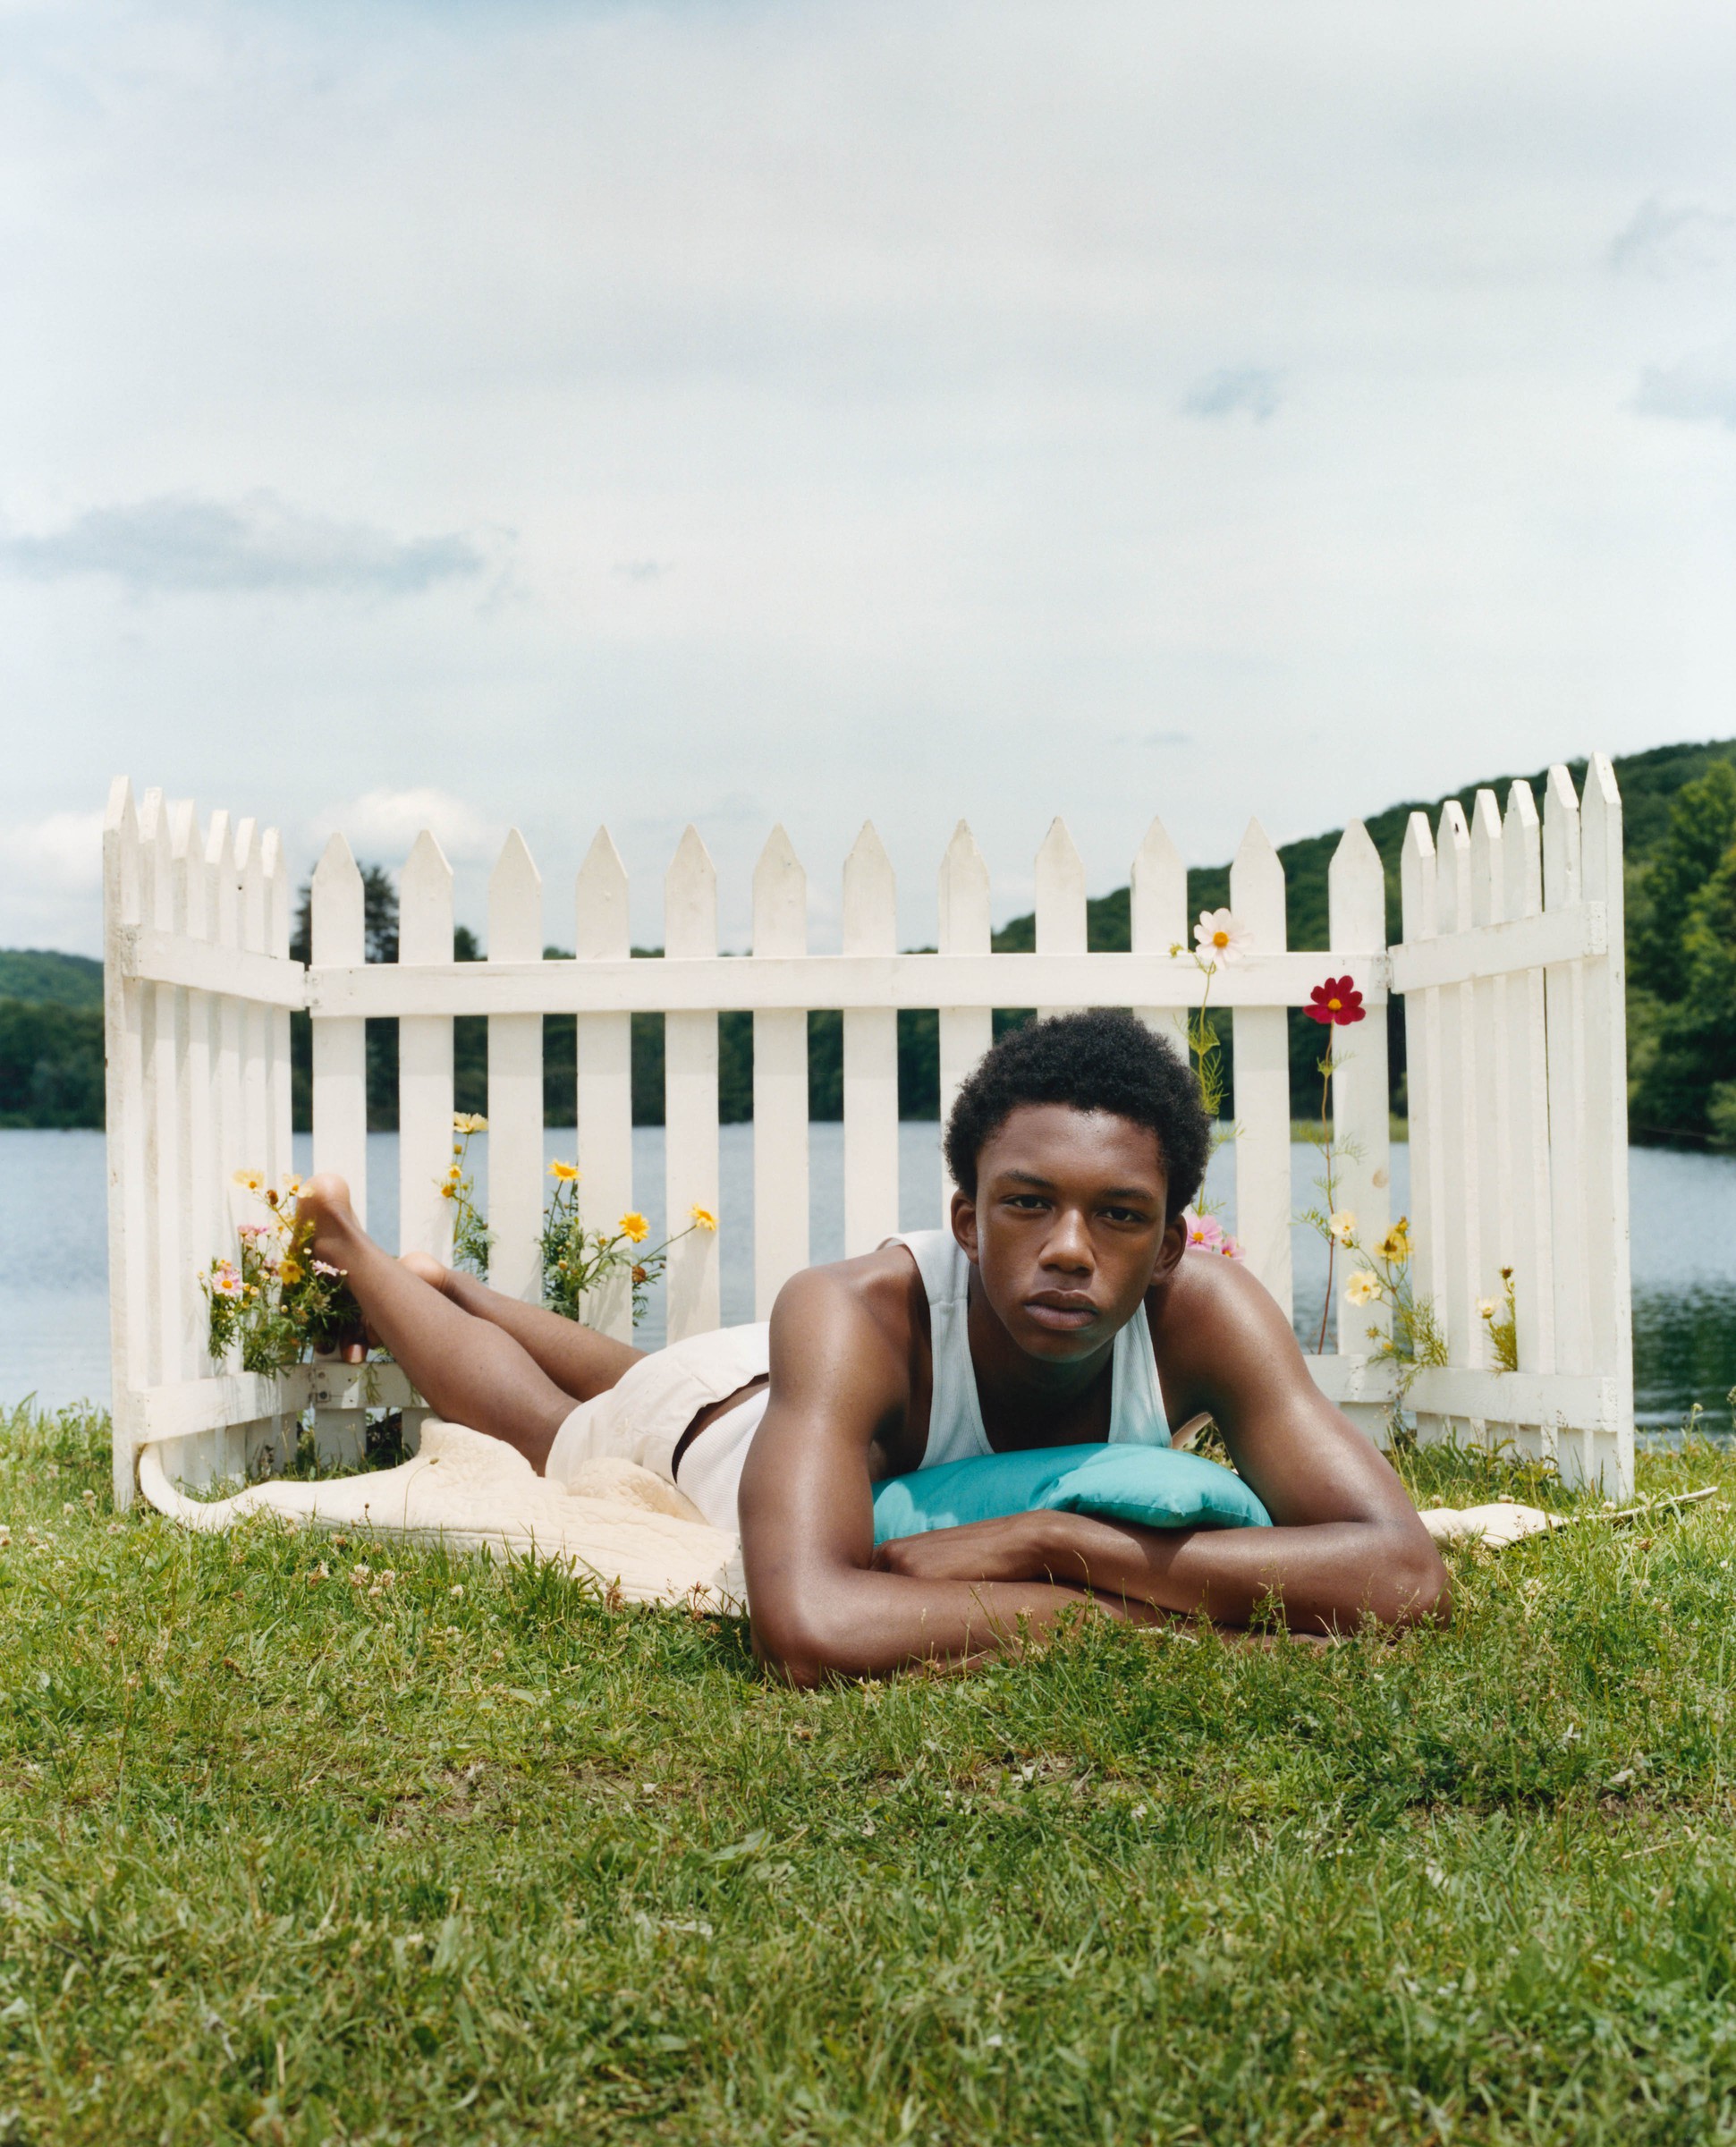 Tyler Mitchell on X: Honored to have photographed the new Louis